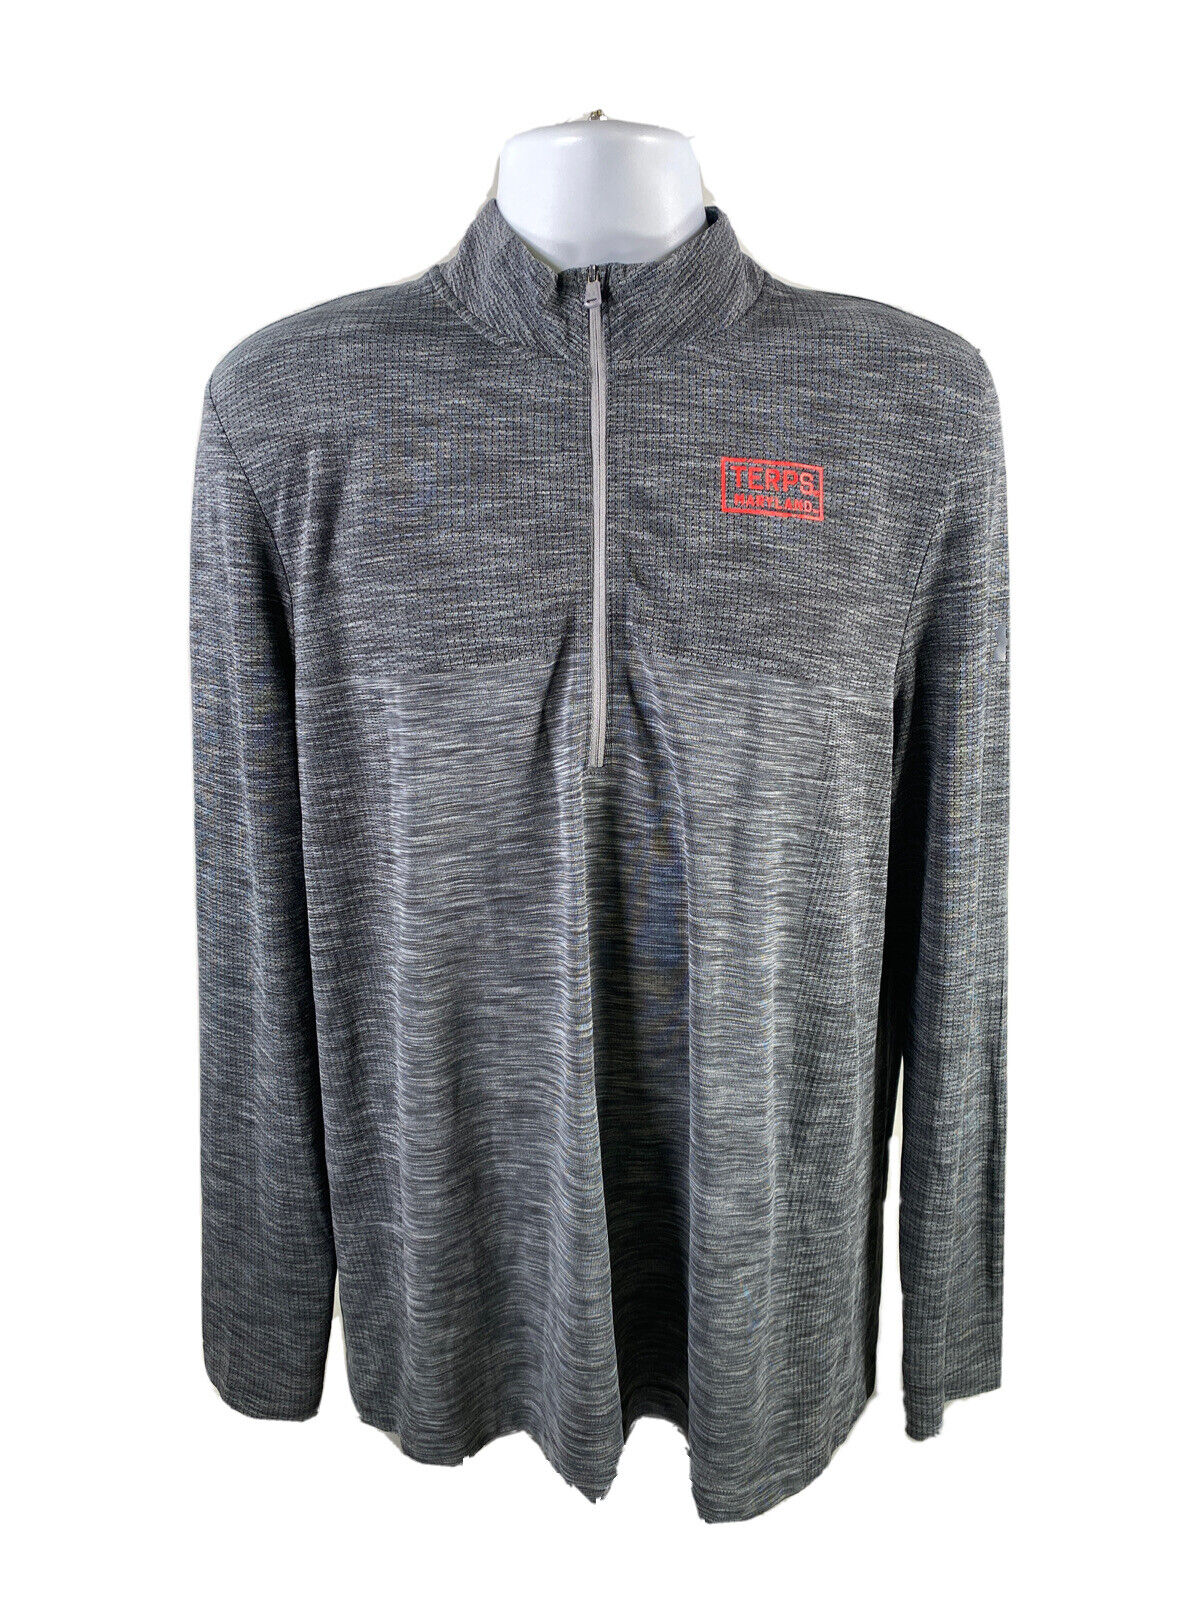 NEW Under Armour Men's Gray Maryland Terrapins 1/4 Zip Athletic Shirt - M